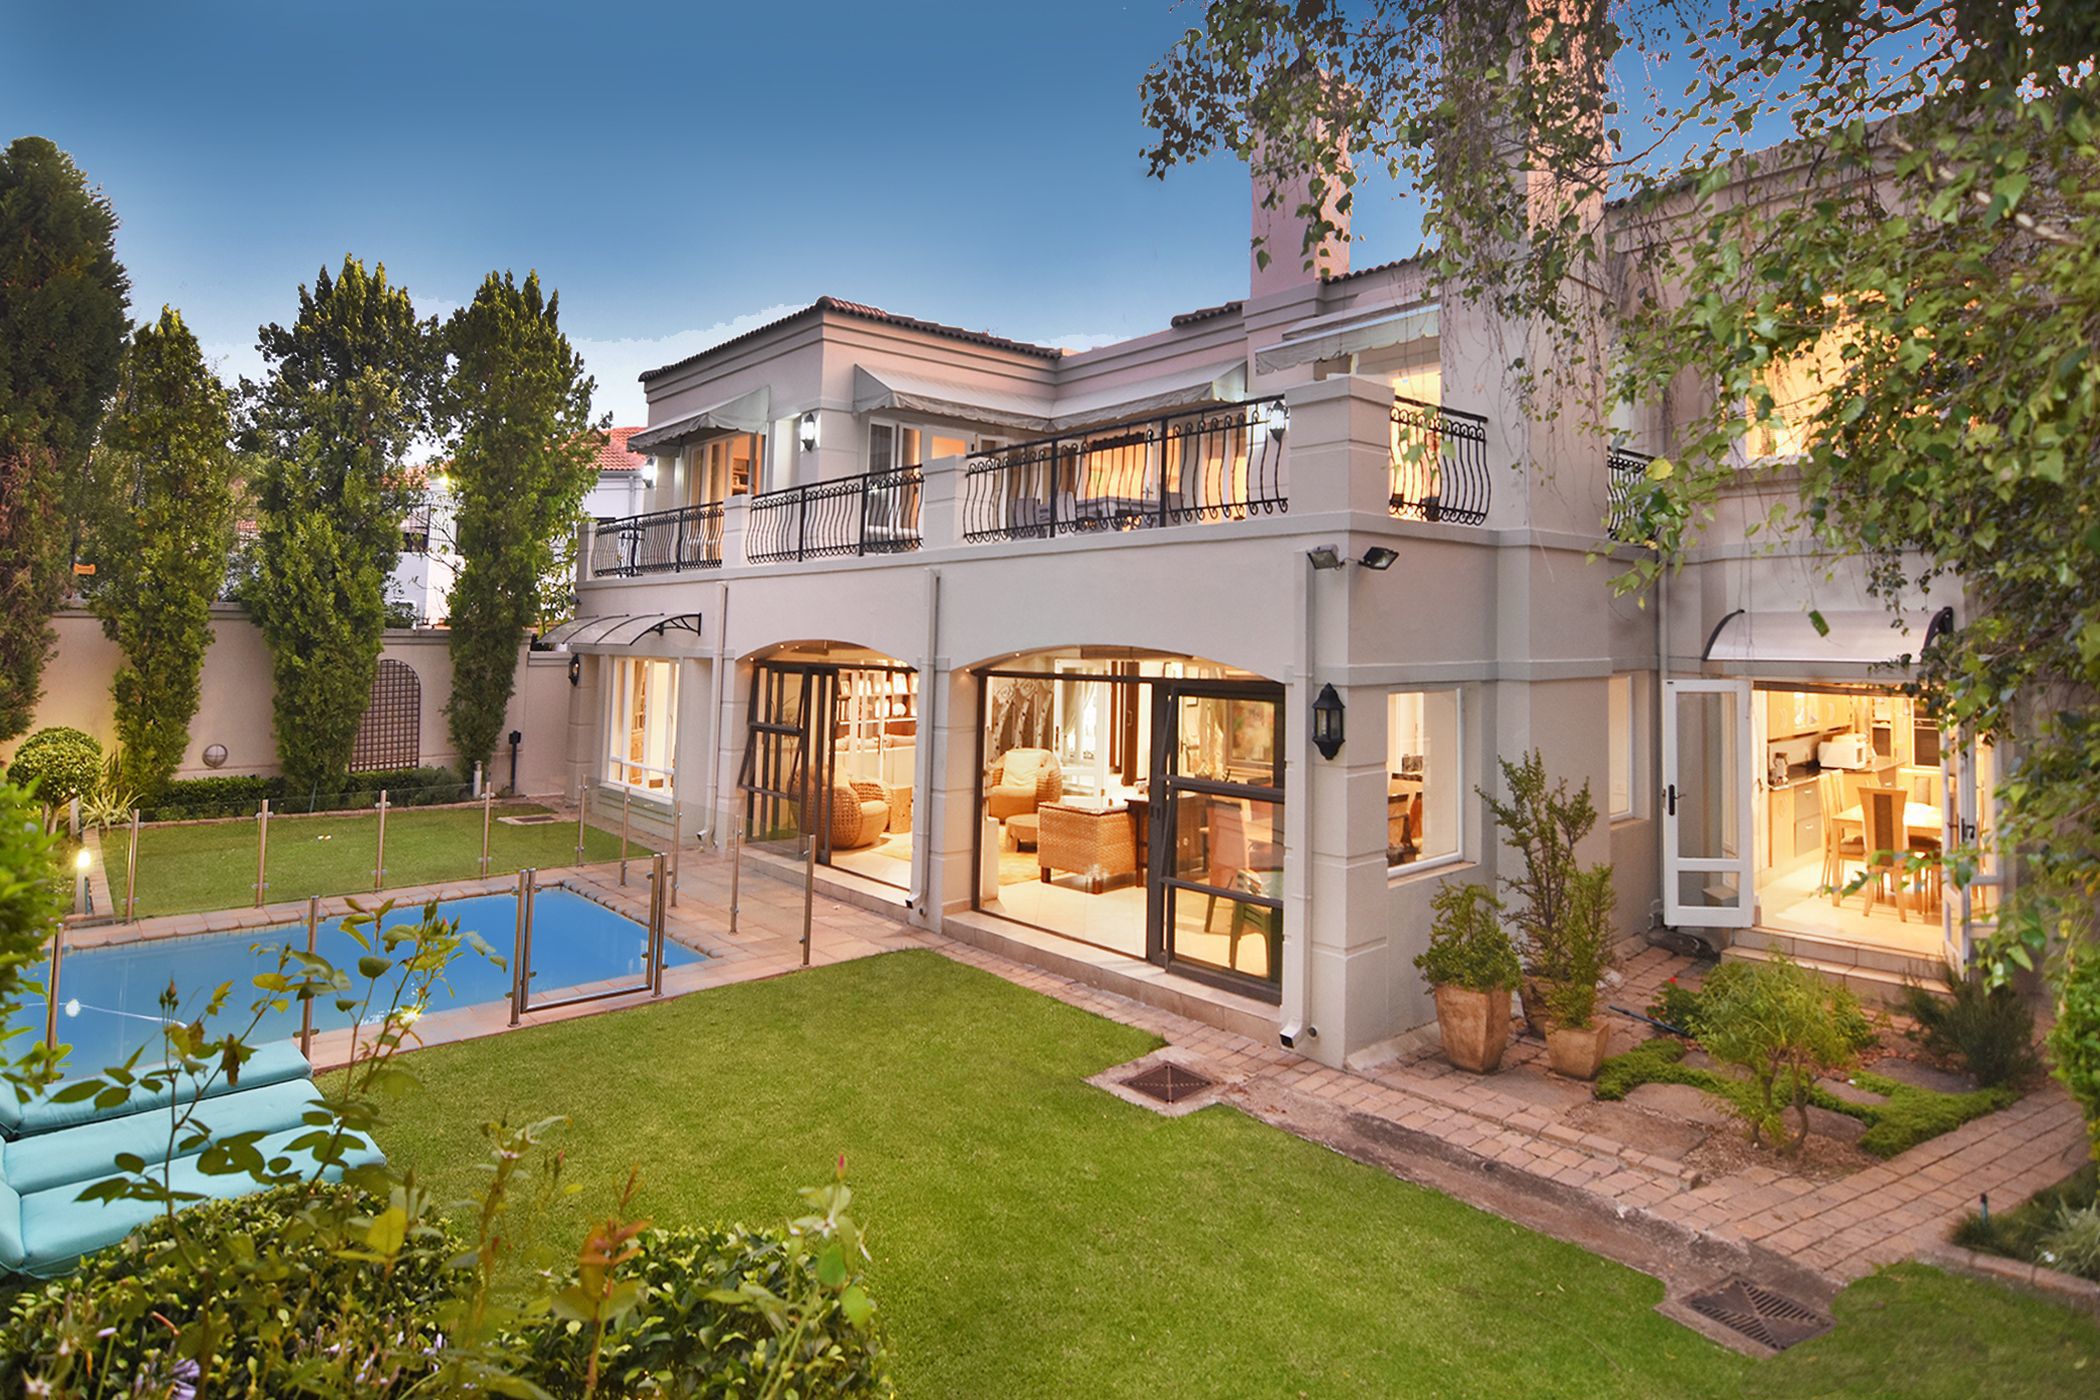 Classic Traditional 4 bedroom double-storey cluster for sale in Hyde Park, Sandton